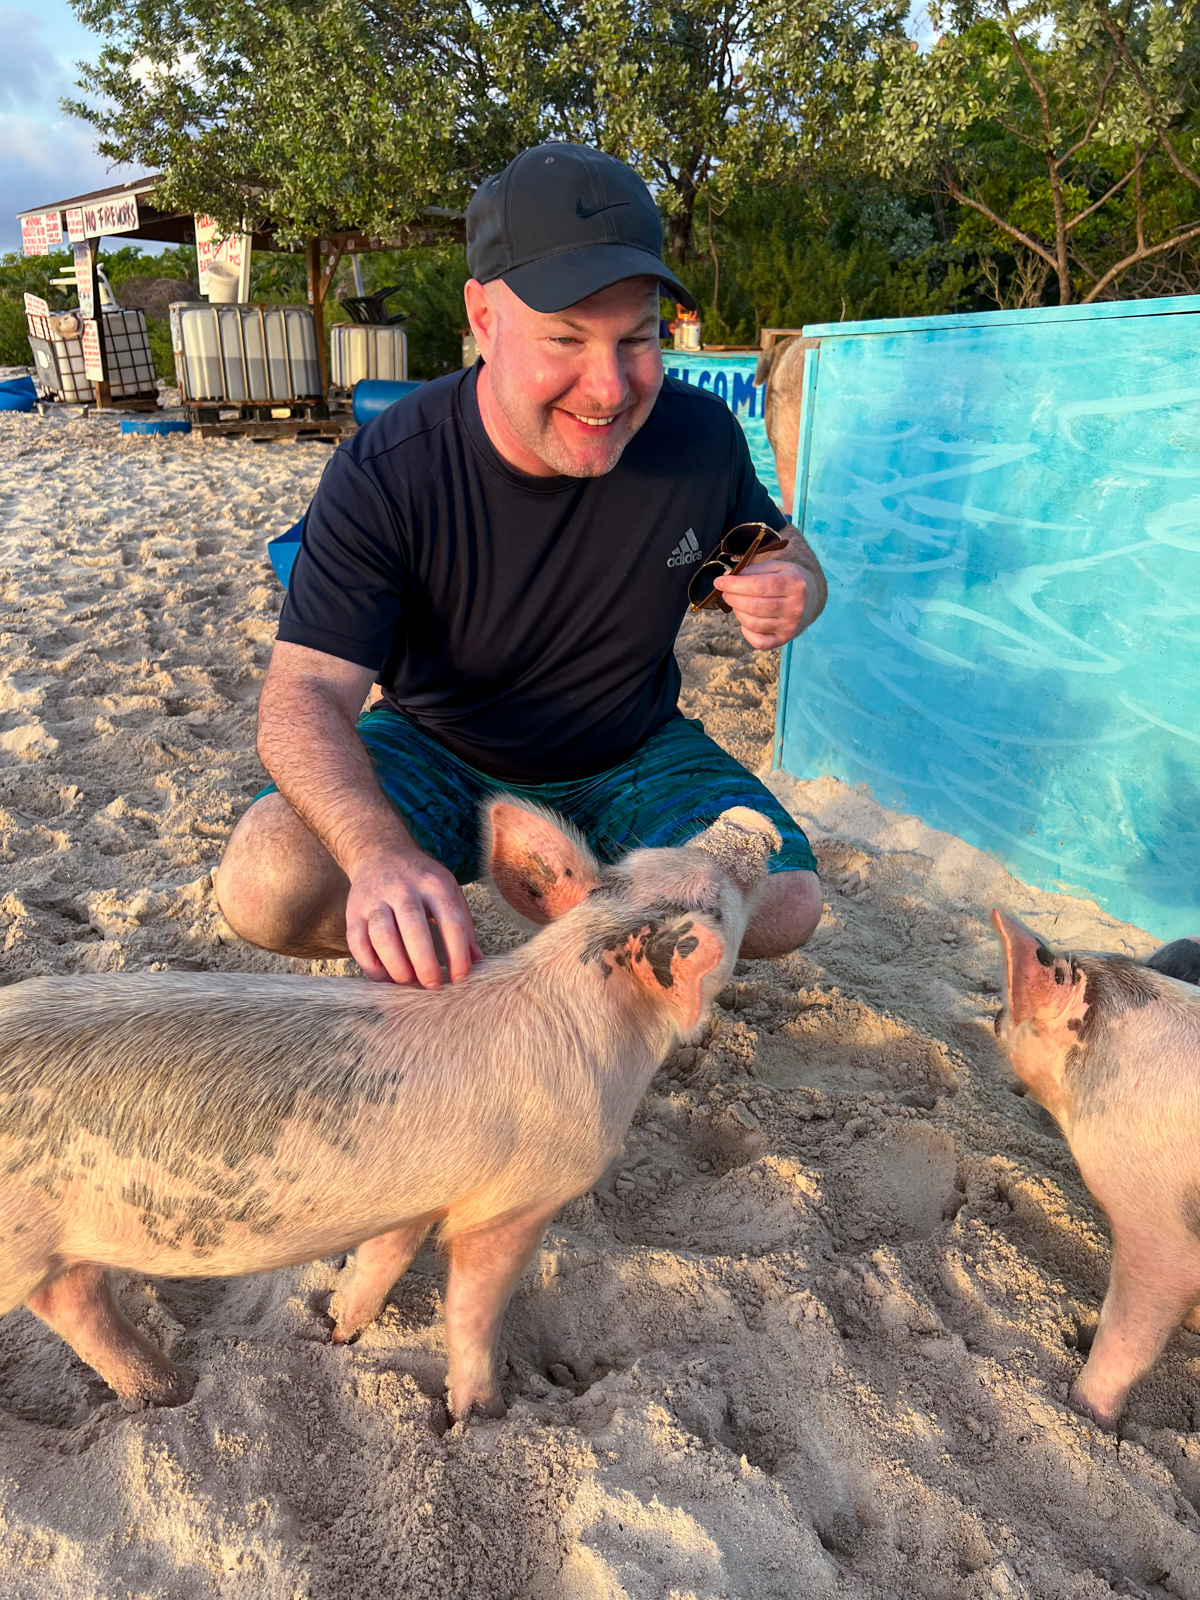 Dave with pigs at sunset